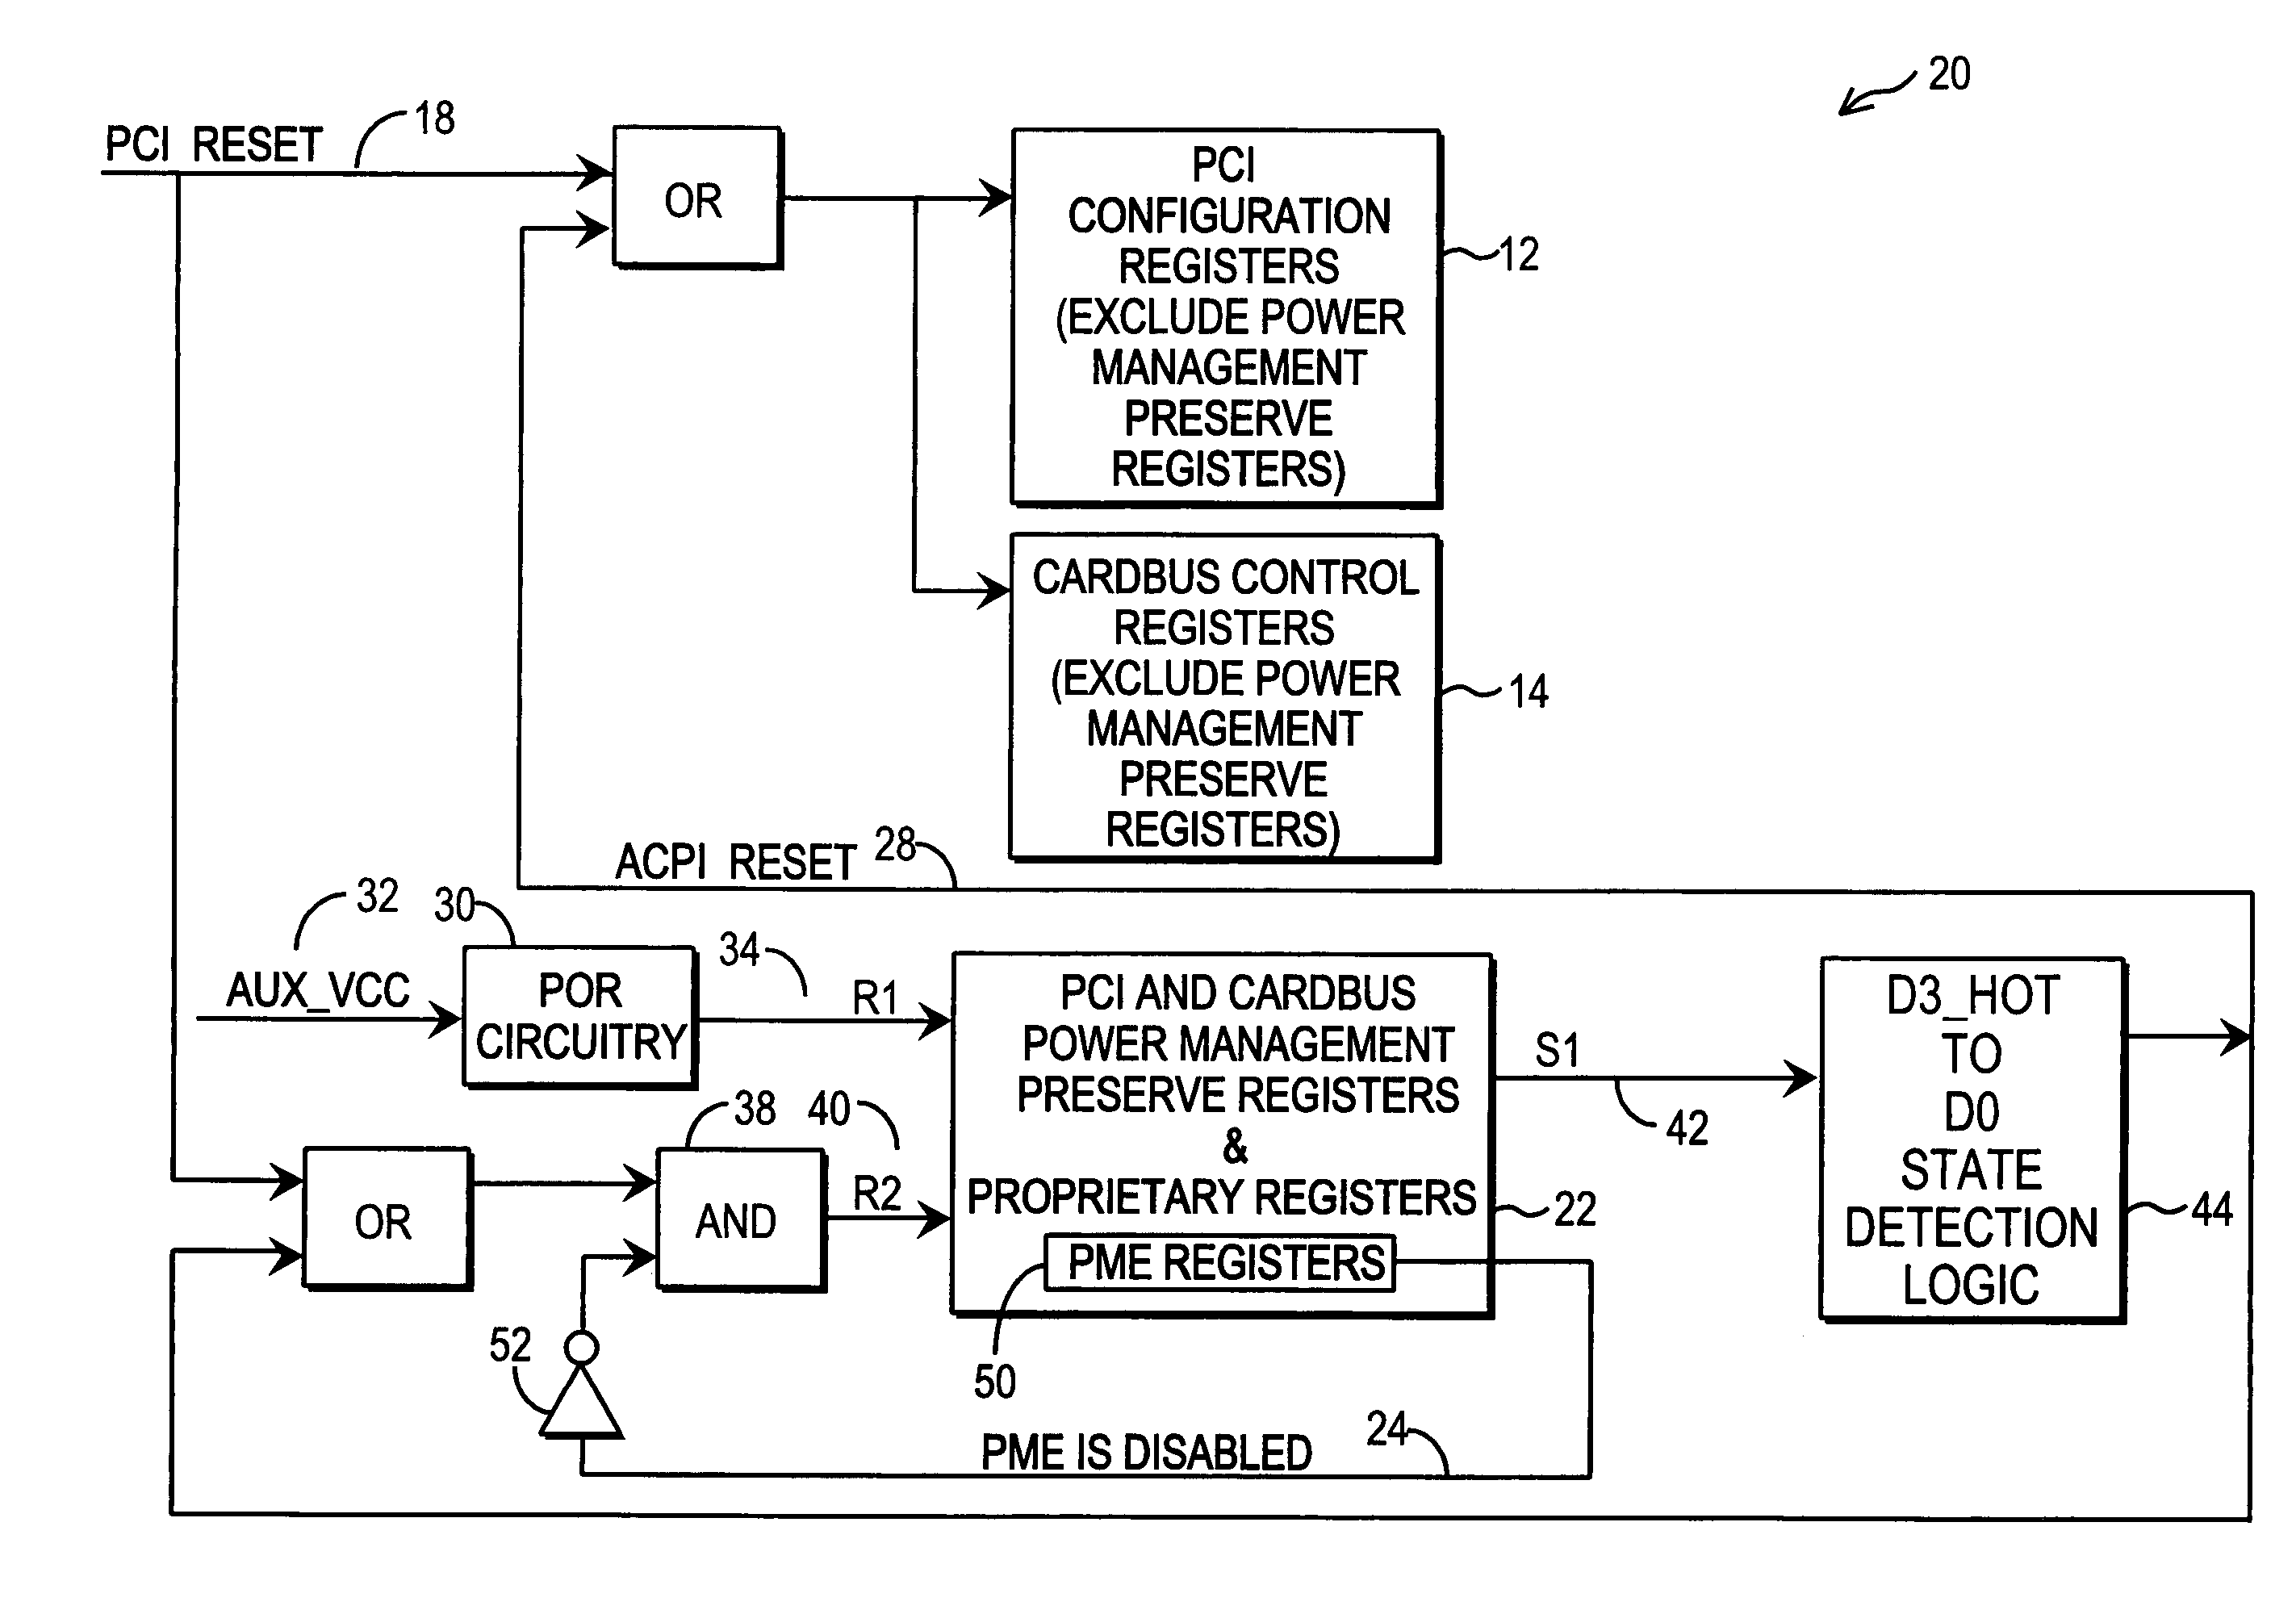 Apparatus for resetting power management enable register and resetting power management register based on an operating system instruction and output of power management enable register